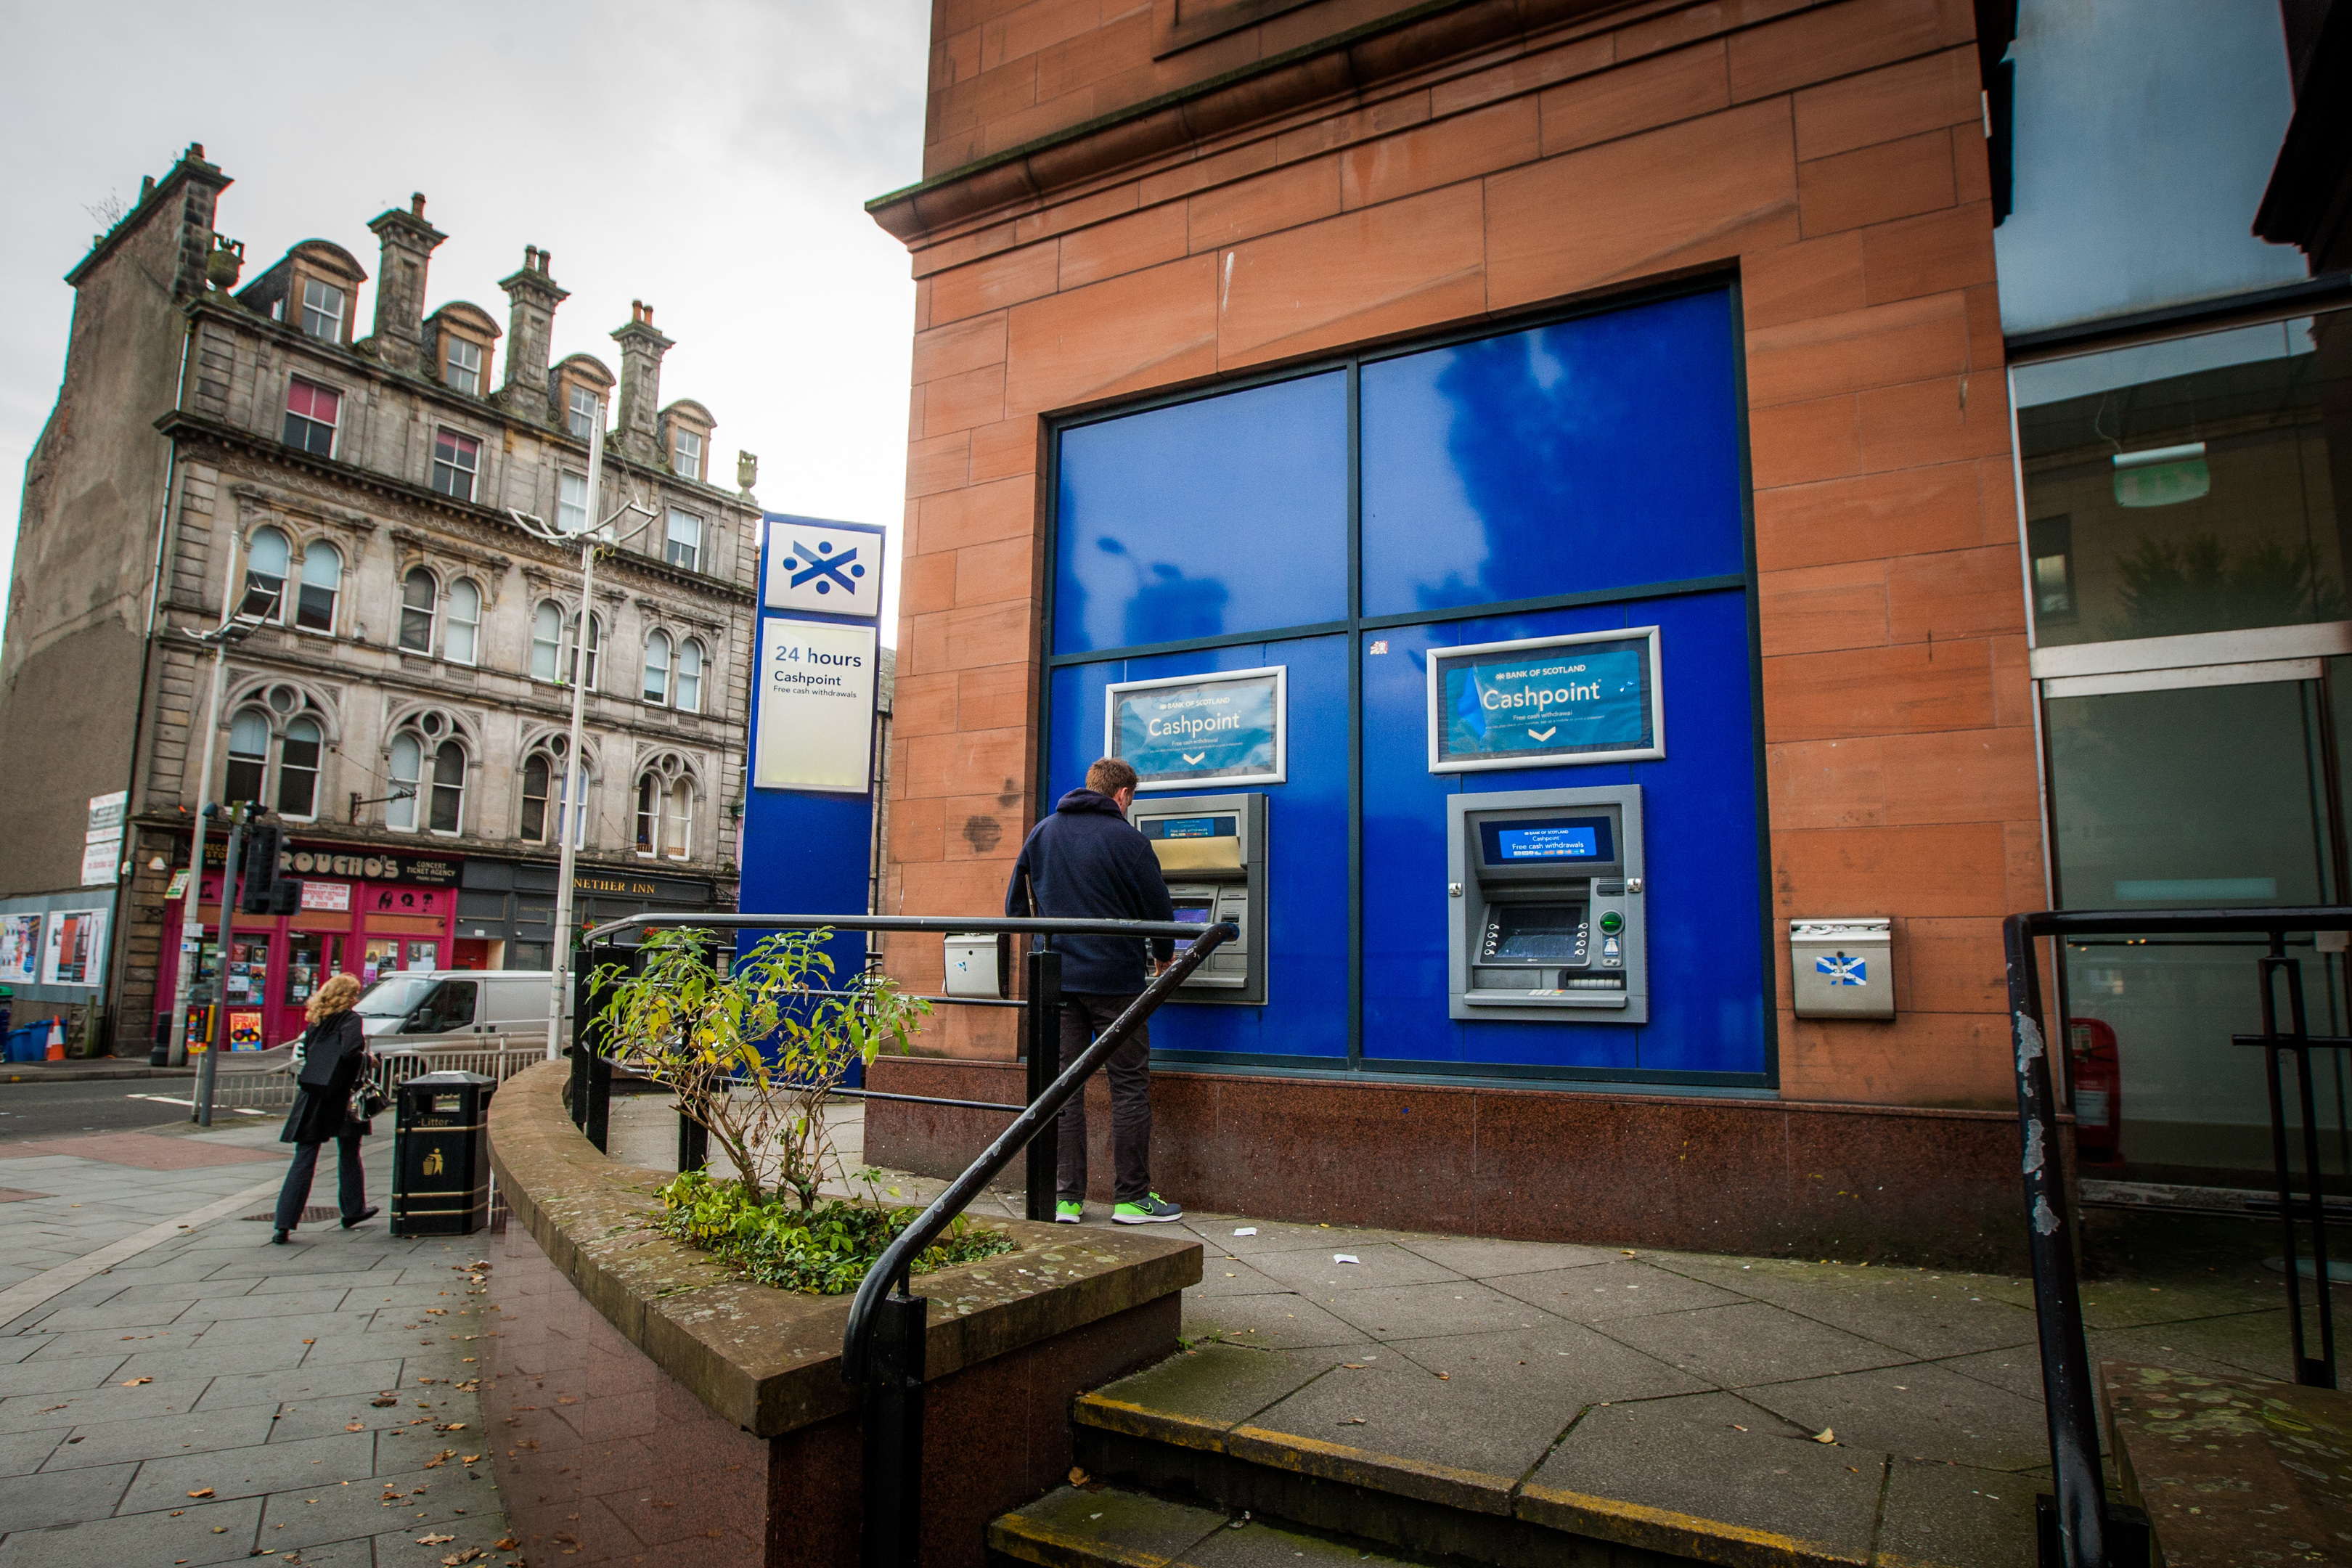 The Bank of Scotland on West Marketgait has reportedly handed out notes withdrawn from circulation.